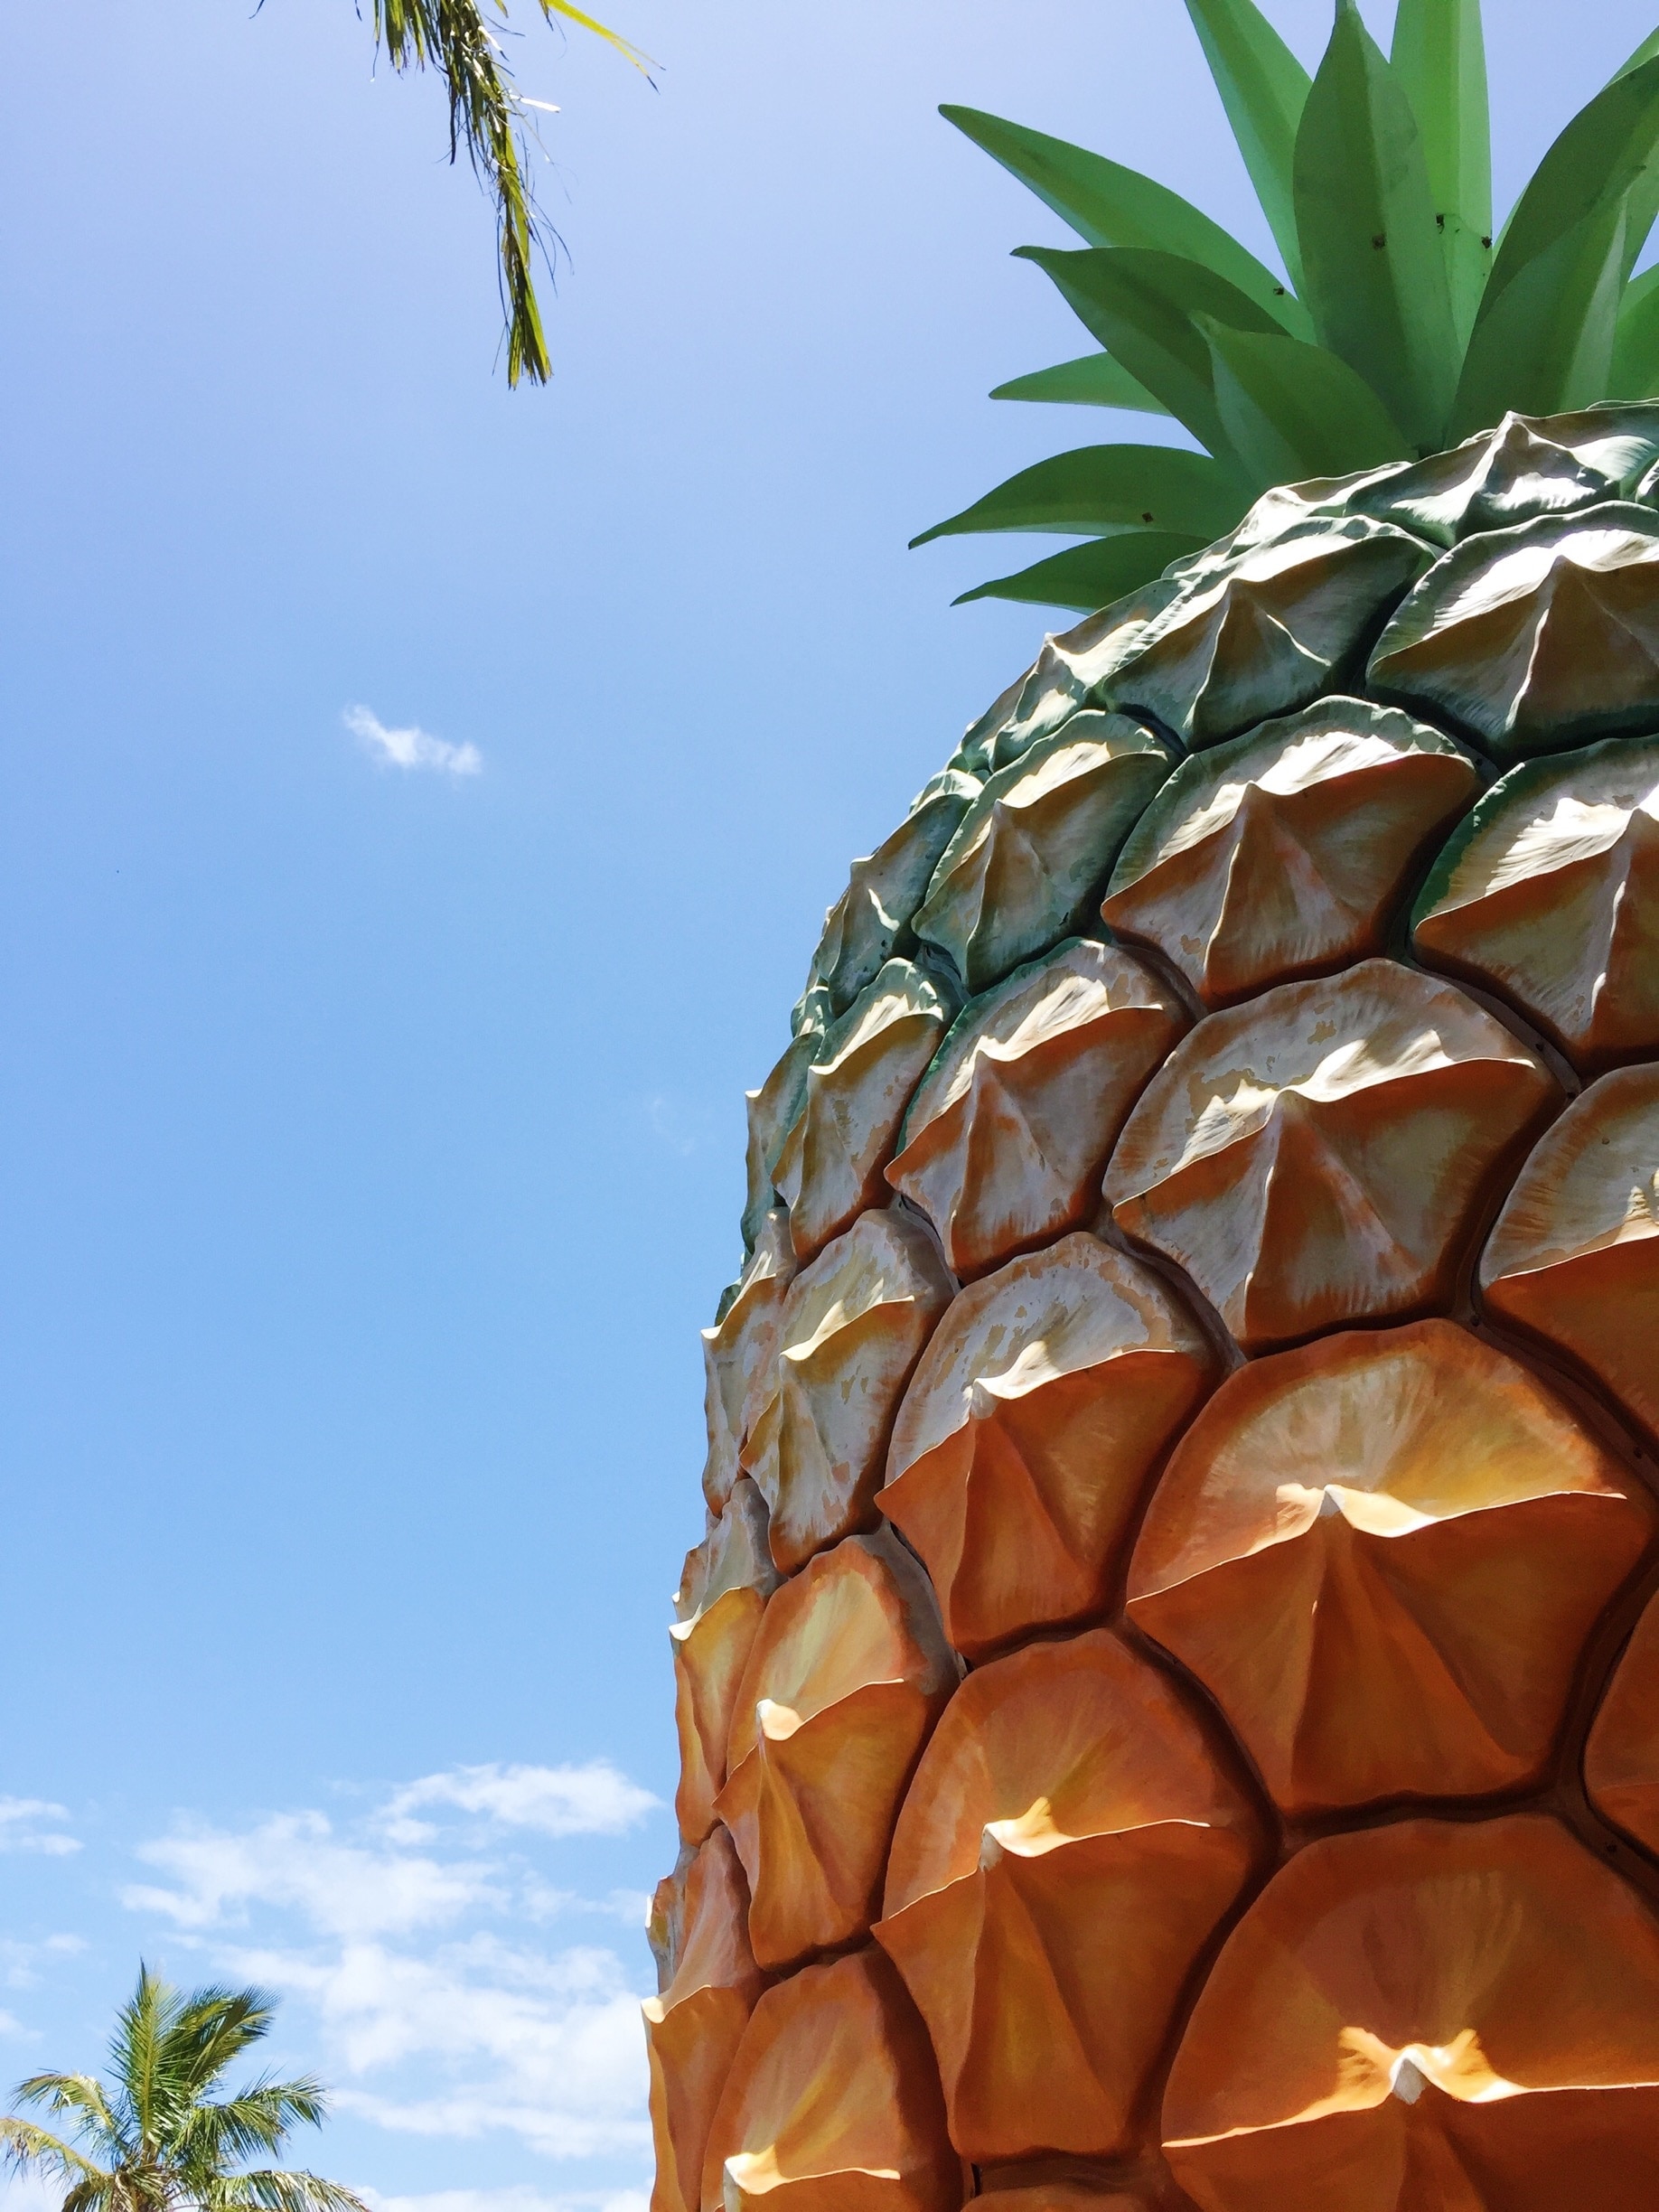 Tick seeing another giant fruit off your list and head to The Big Pineapple on the #sunshinecoast #zoo #pineapple #australia #fruit #stunningstructures